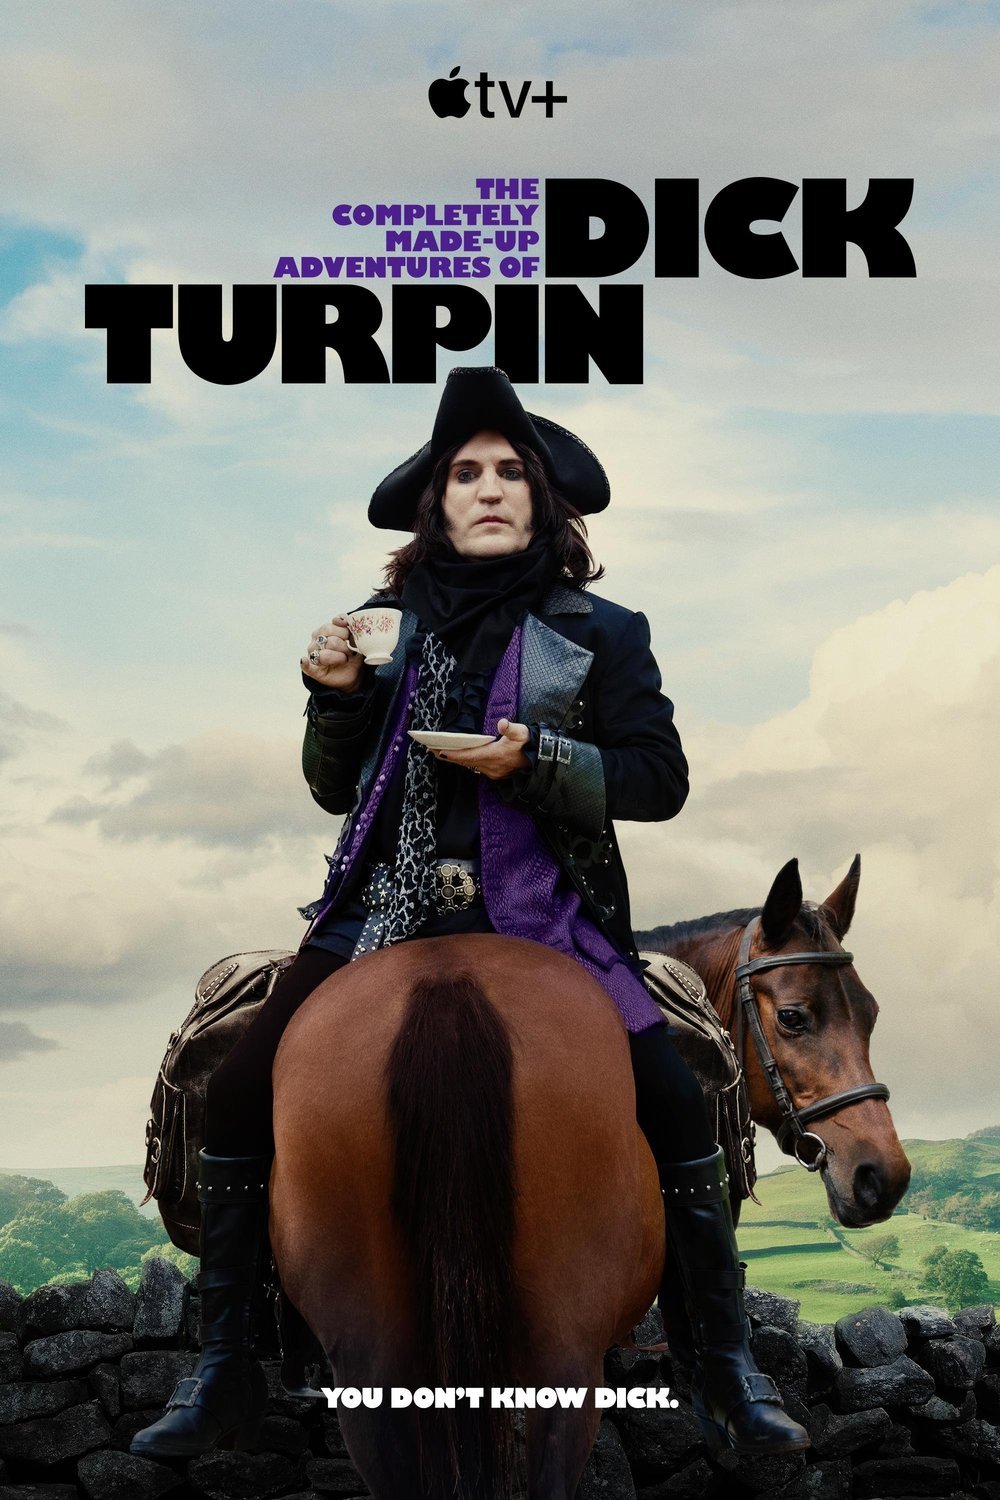 Poster of the movie The Completely Made-Up Adventures of Dick Turpin